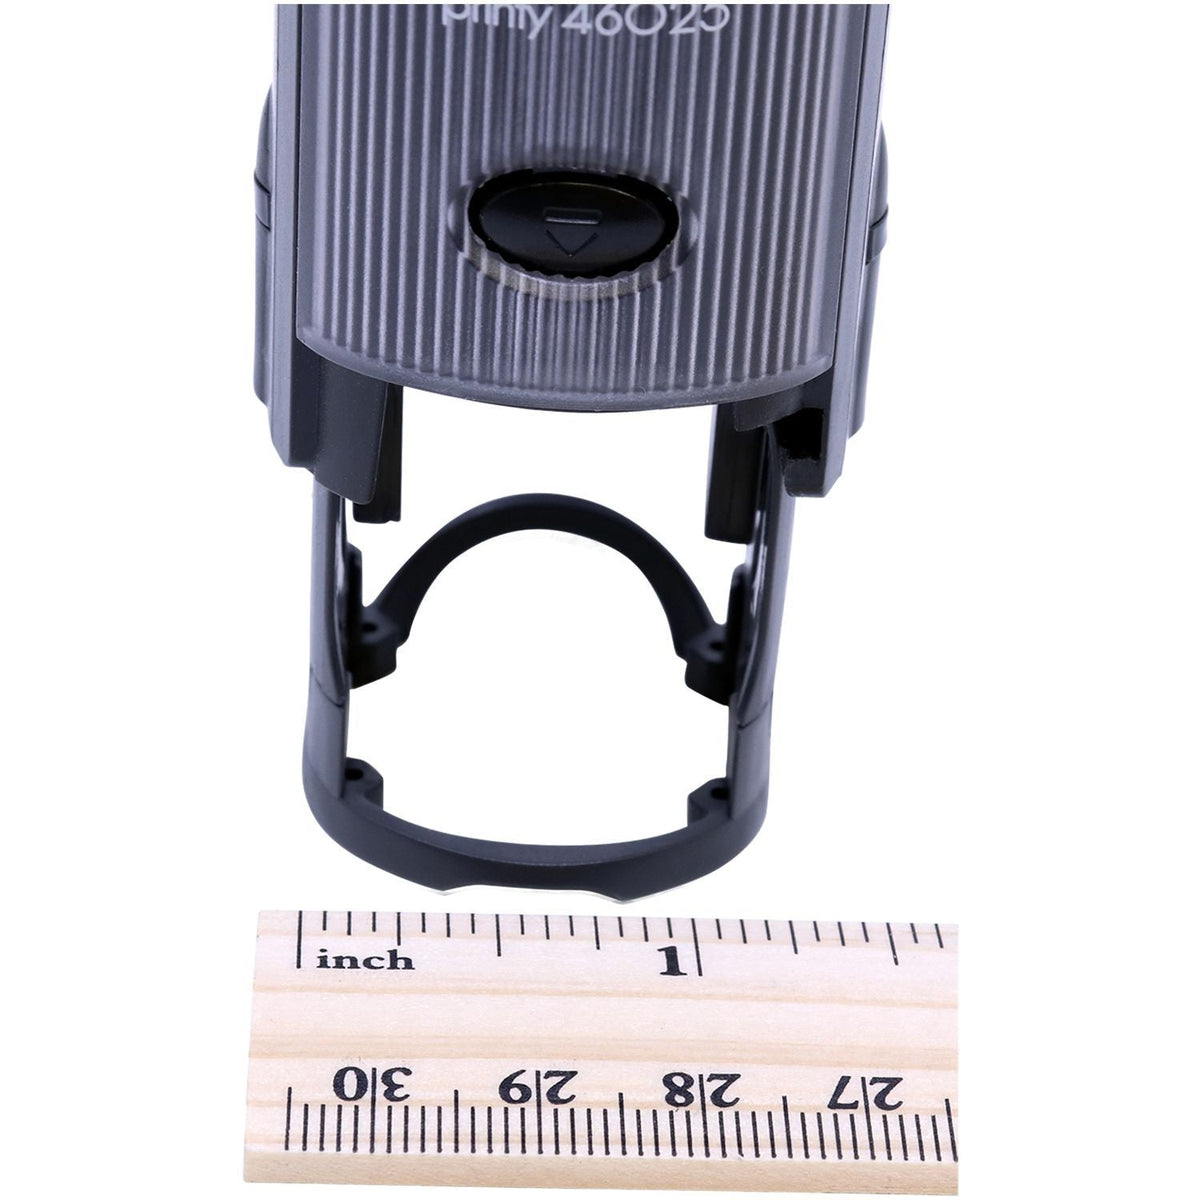 Measurment of Self-Inking Round Thumbs Up Stamp with Ruler